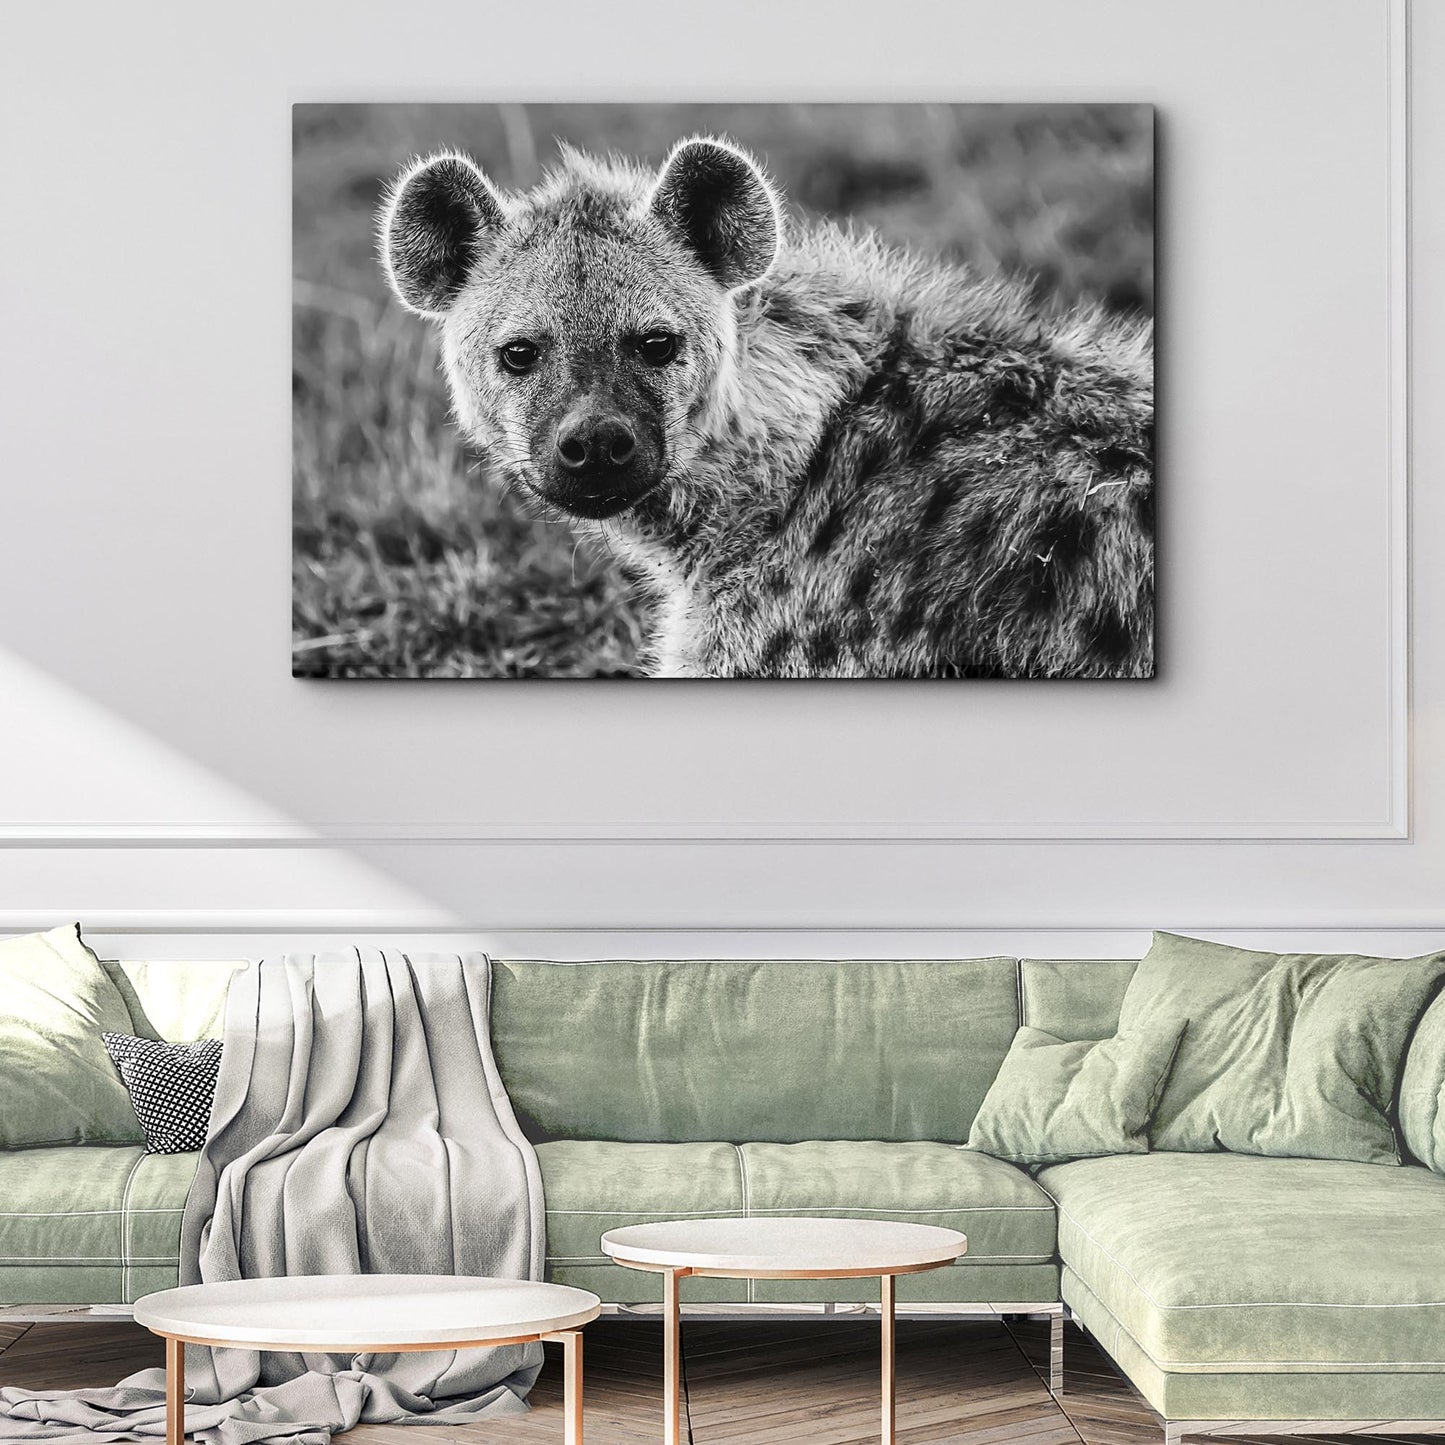 Hyena in Black and White Canvas Wall Art - Image by Tailored Canvases